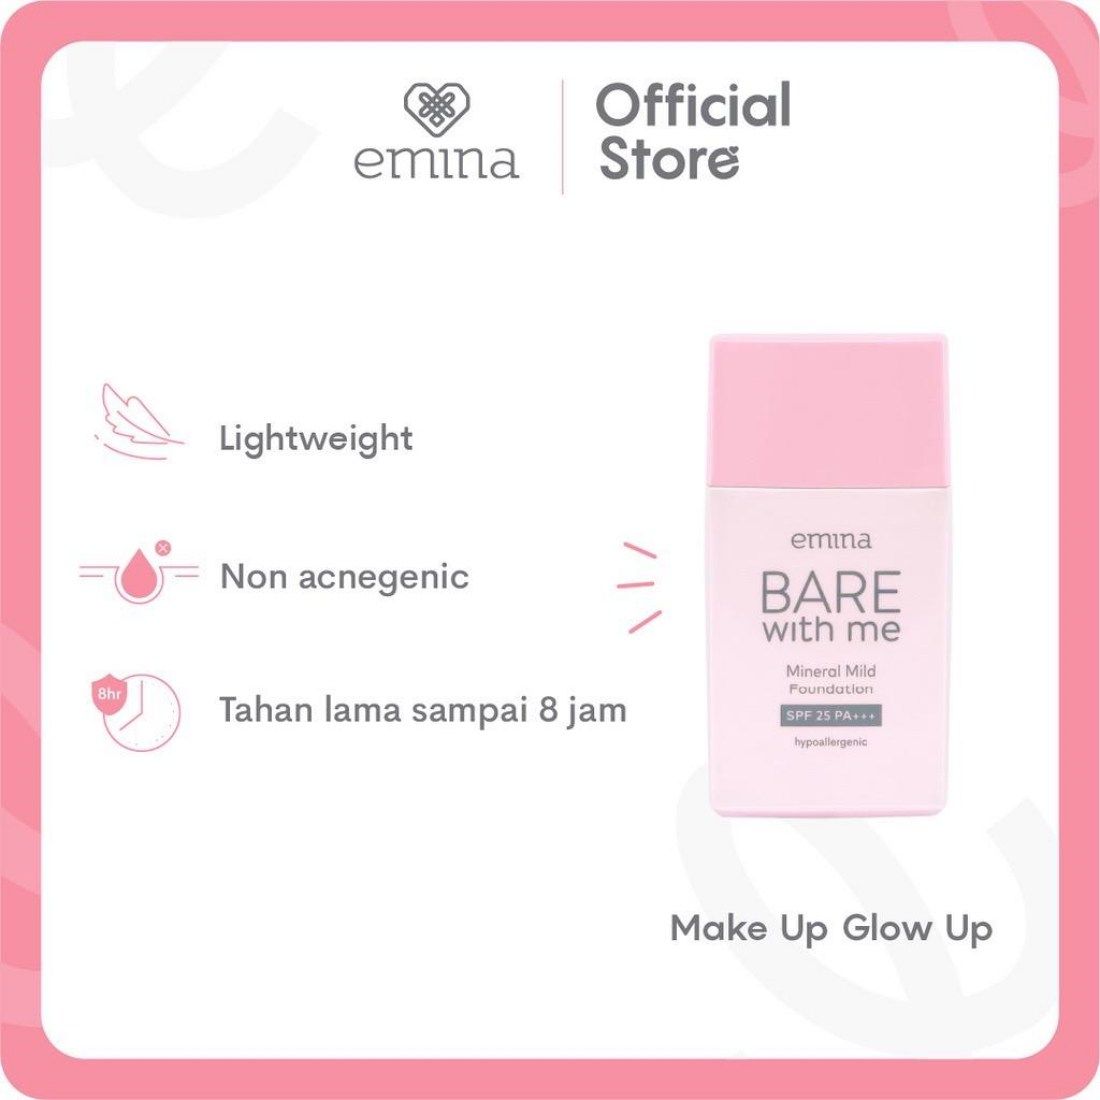 Emina Bare With Me Mineral Mild Foundation.